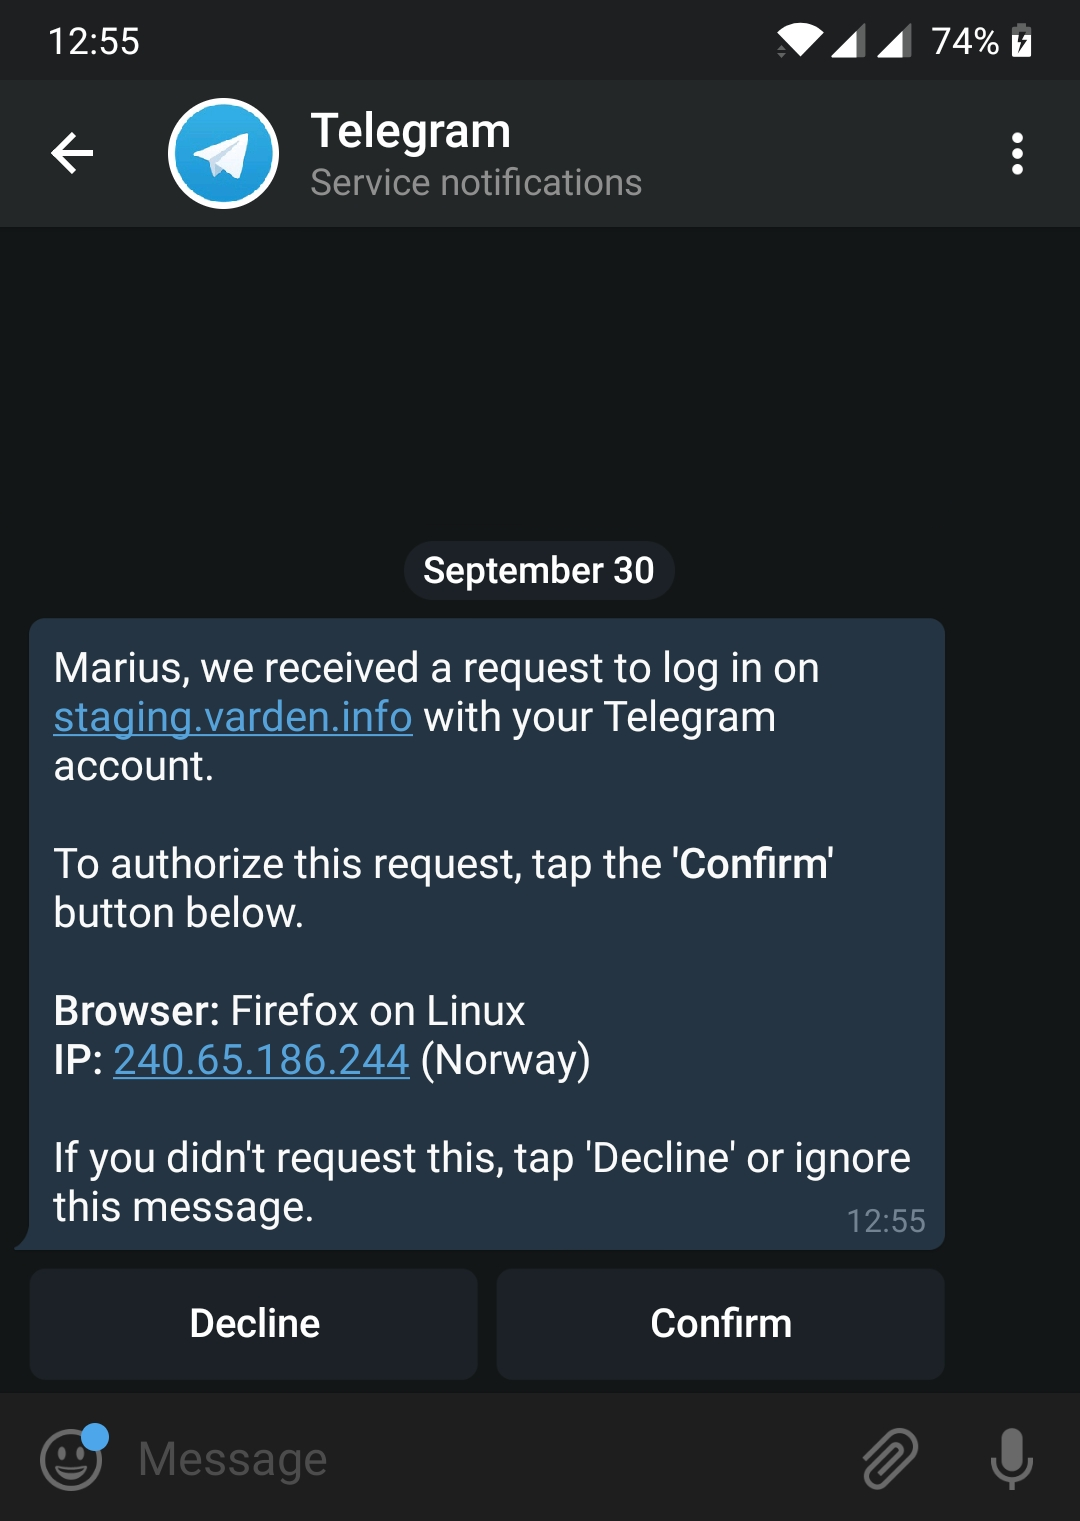 ../_images/telegram-08-preview-confirm.png